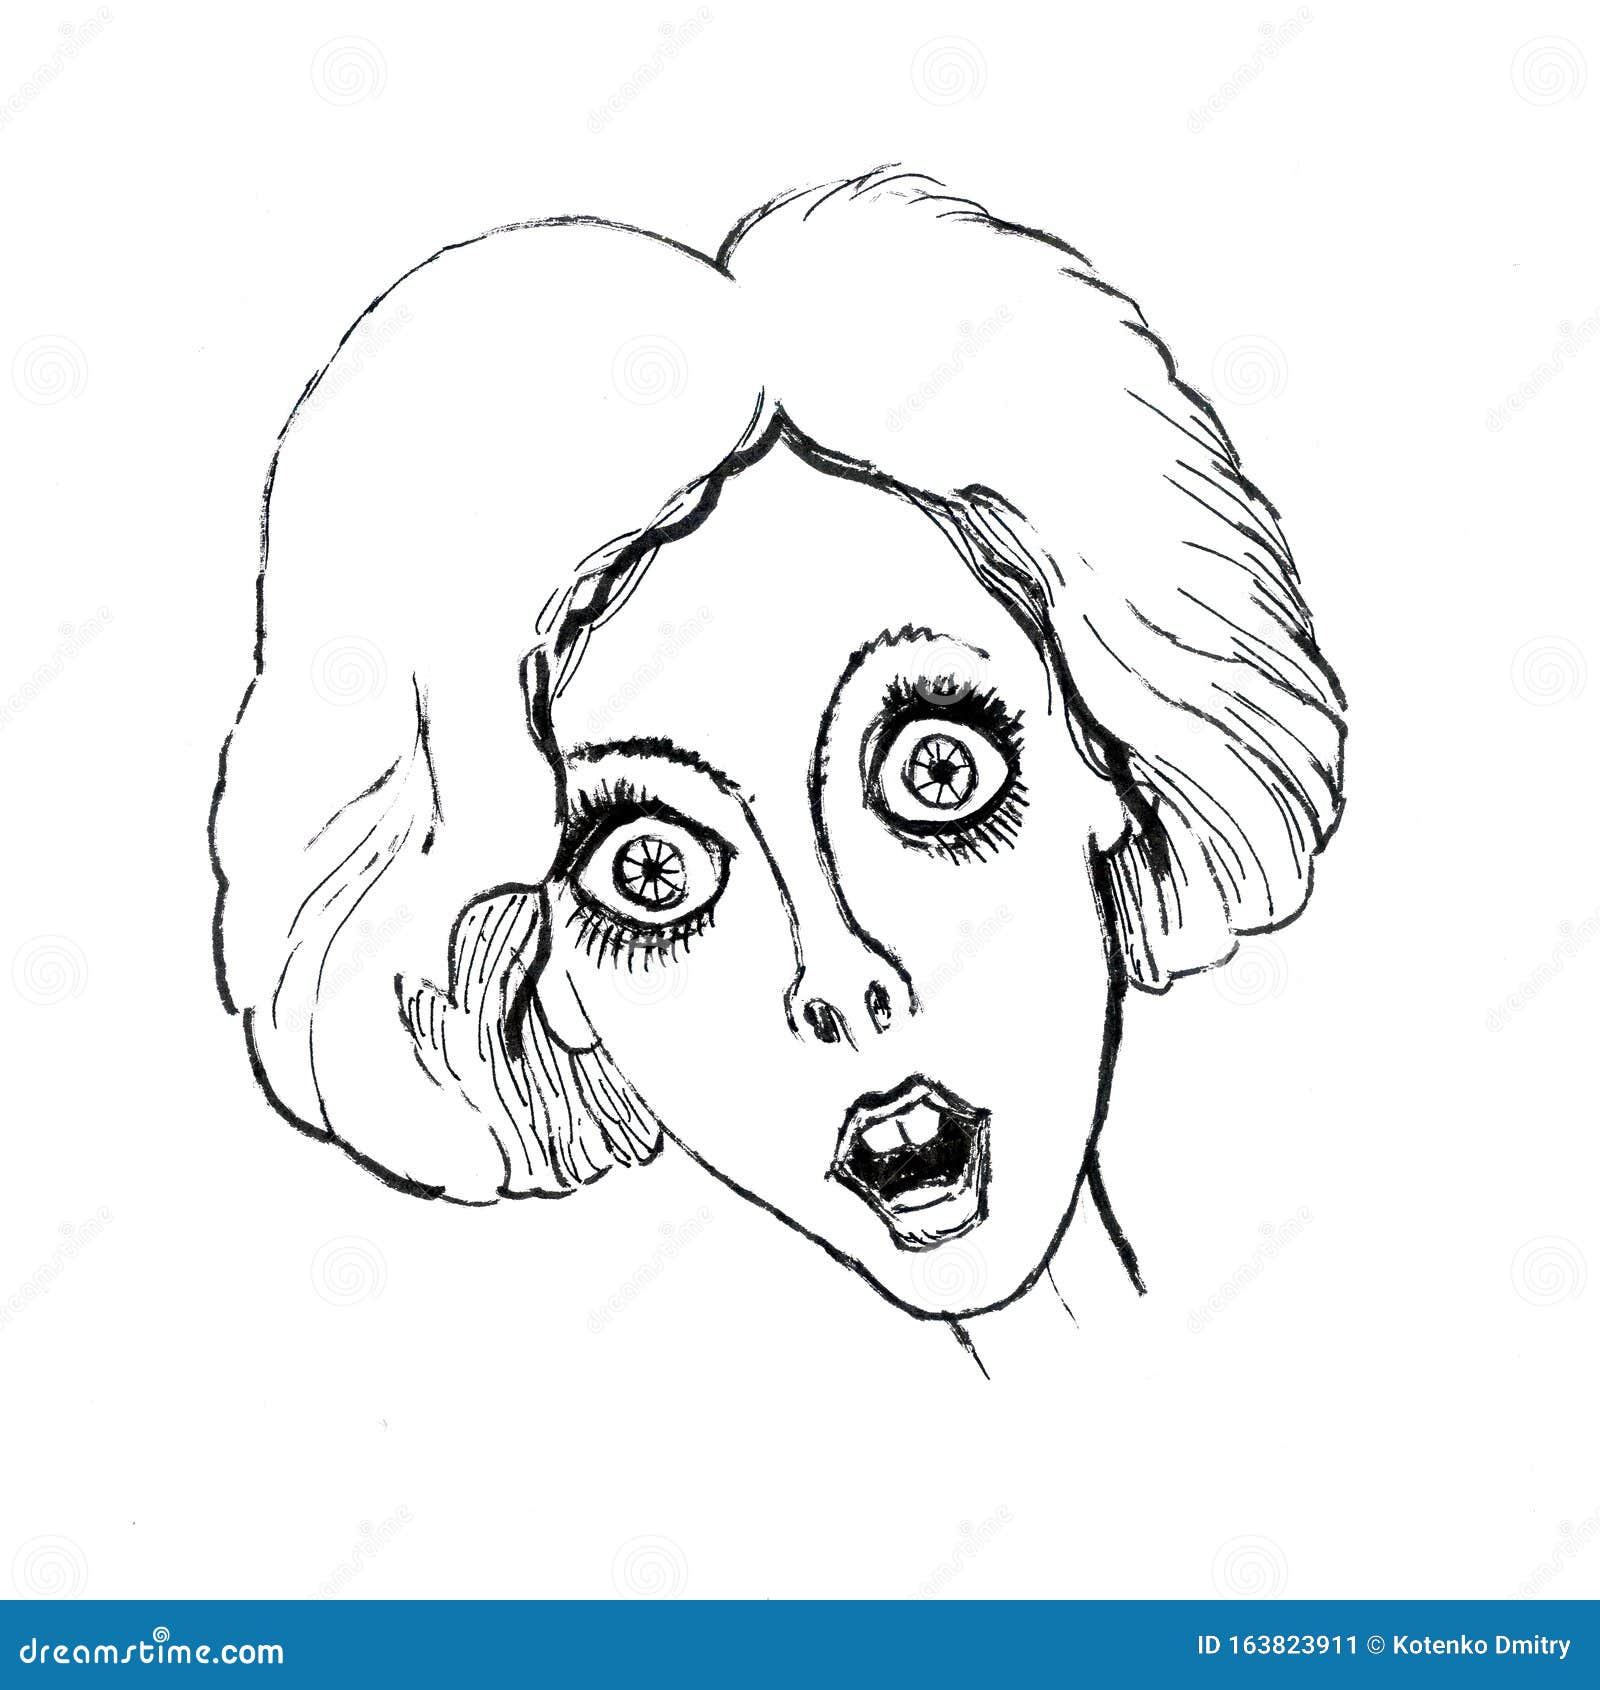 face of scared young pretty woman cartoon icon image vector illustration  design black sketch line Stock Vector